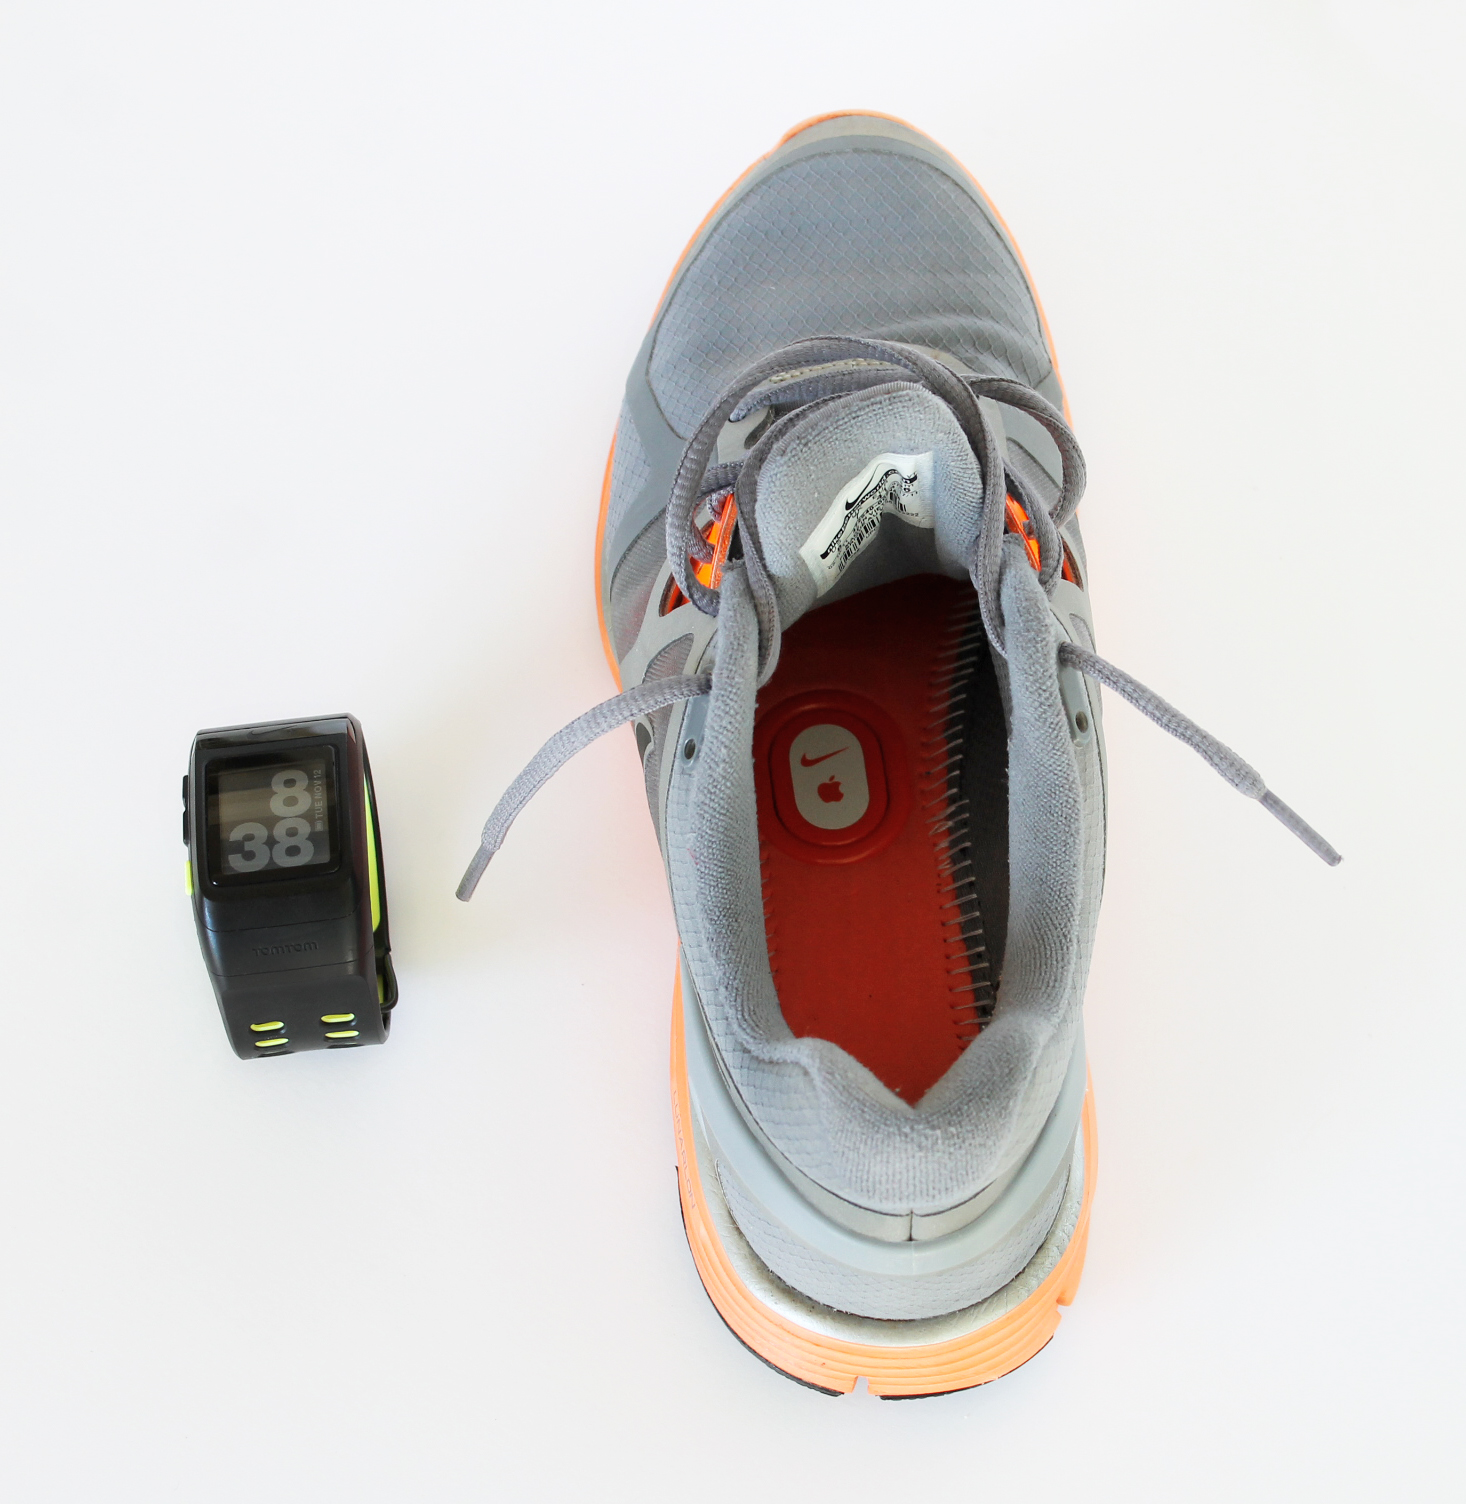 Ofensa Publicidad combate The Nike+ SportWatch and the Nike+ Sensor: Motivating You To Run Your Best